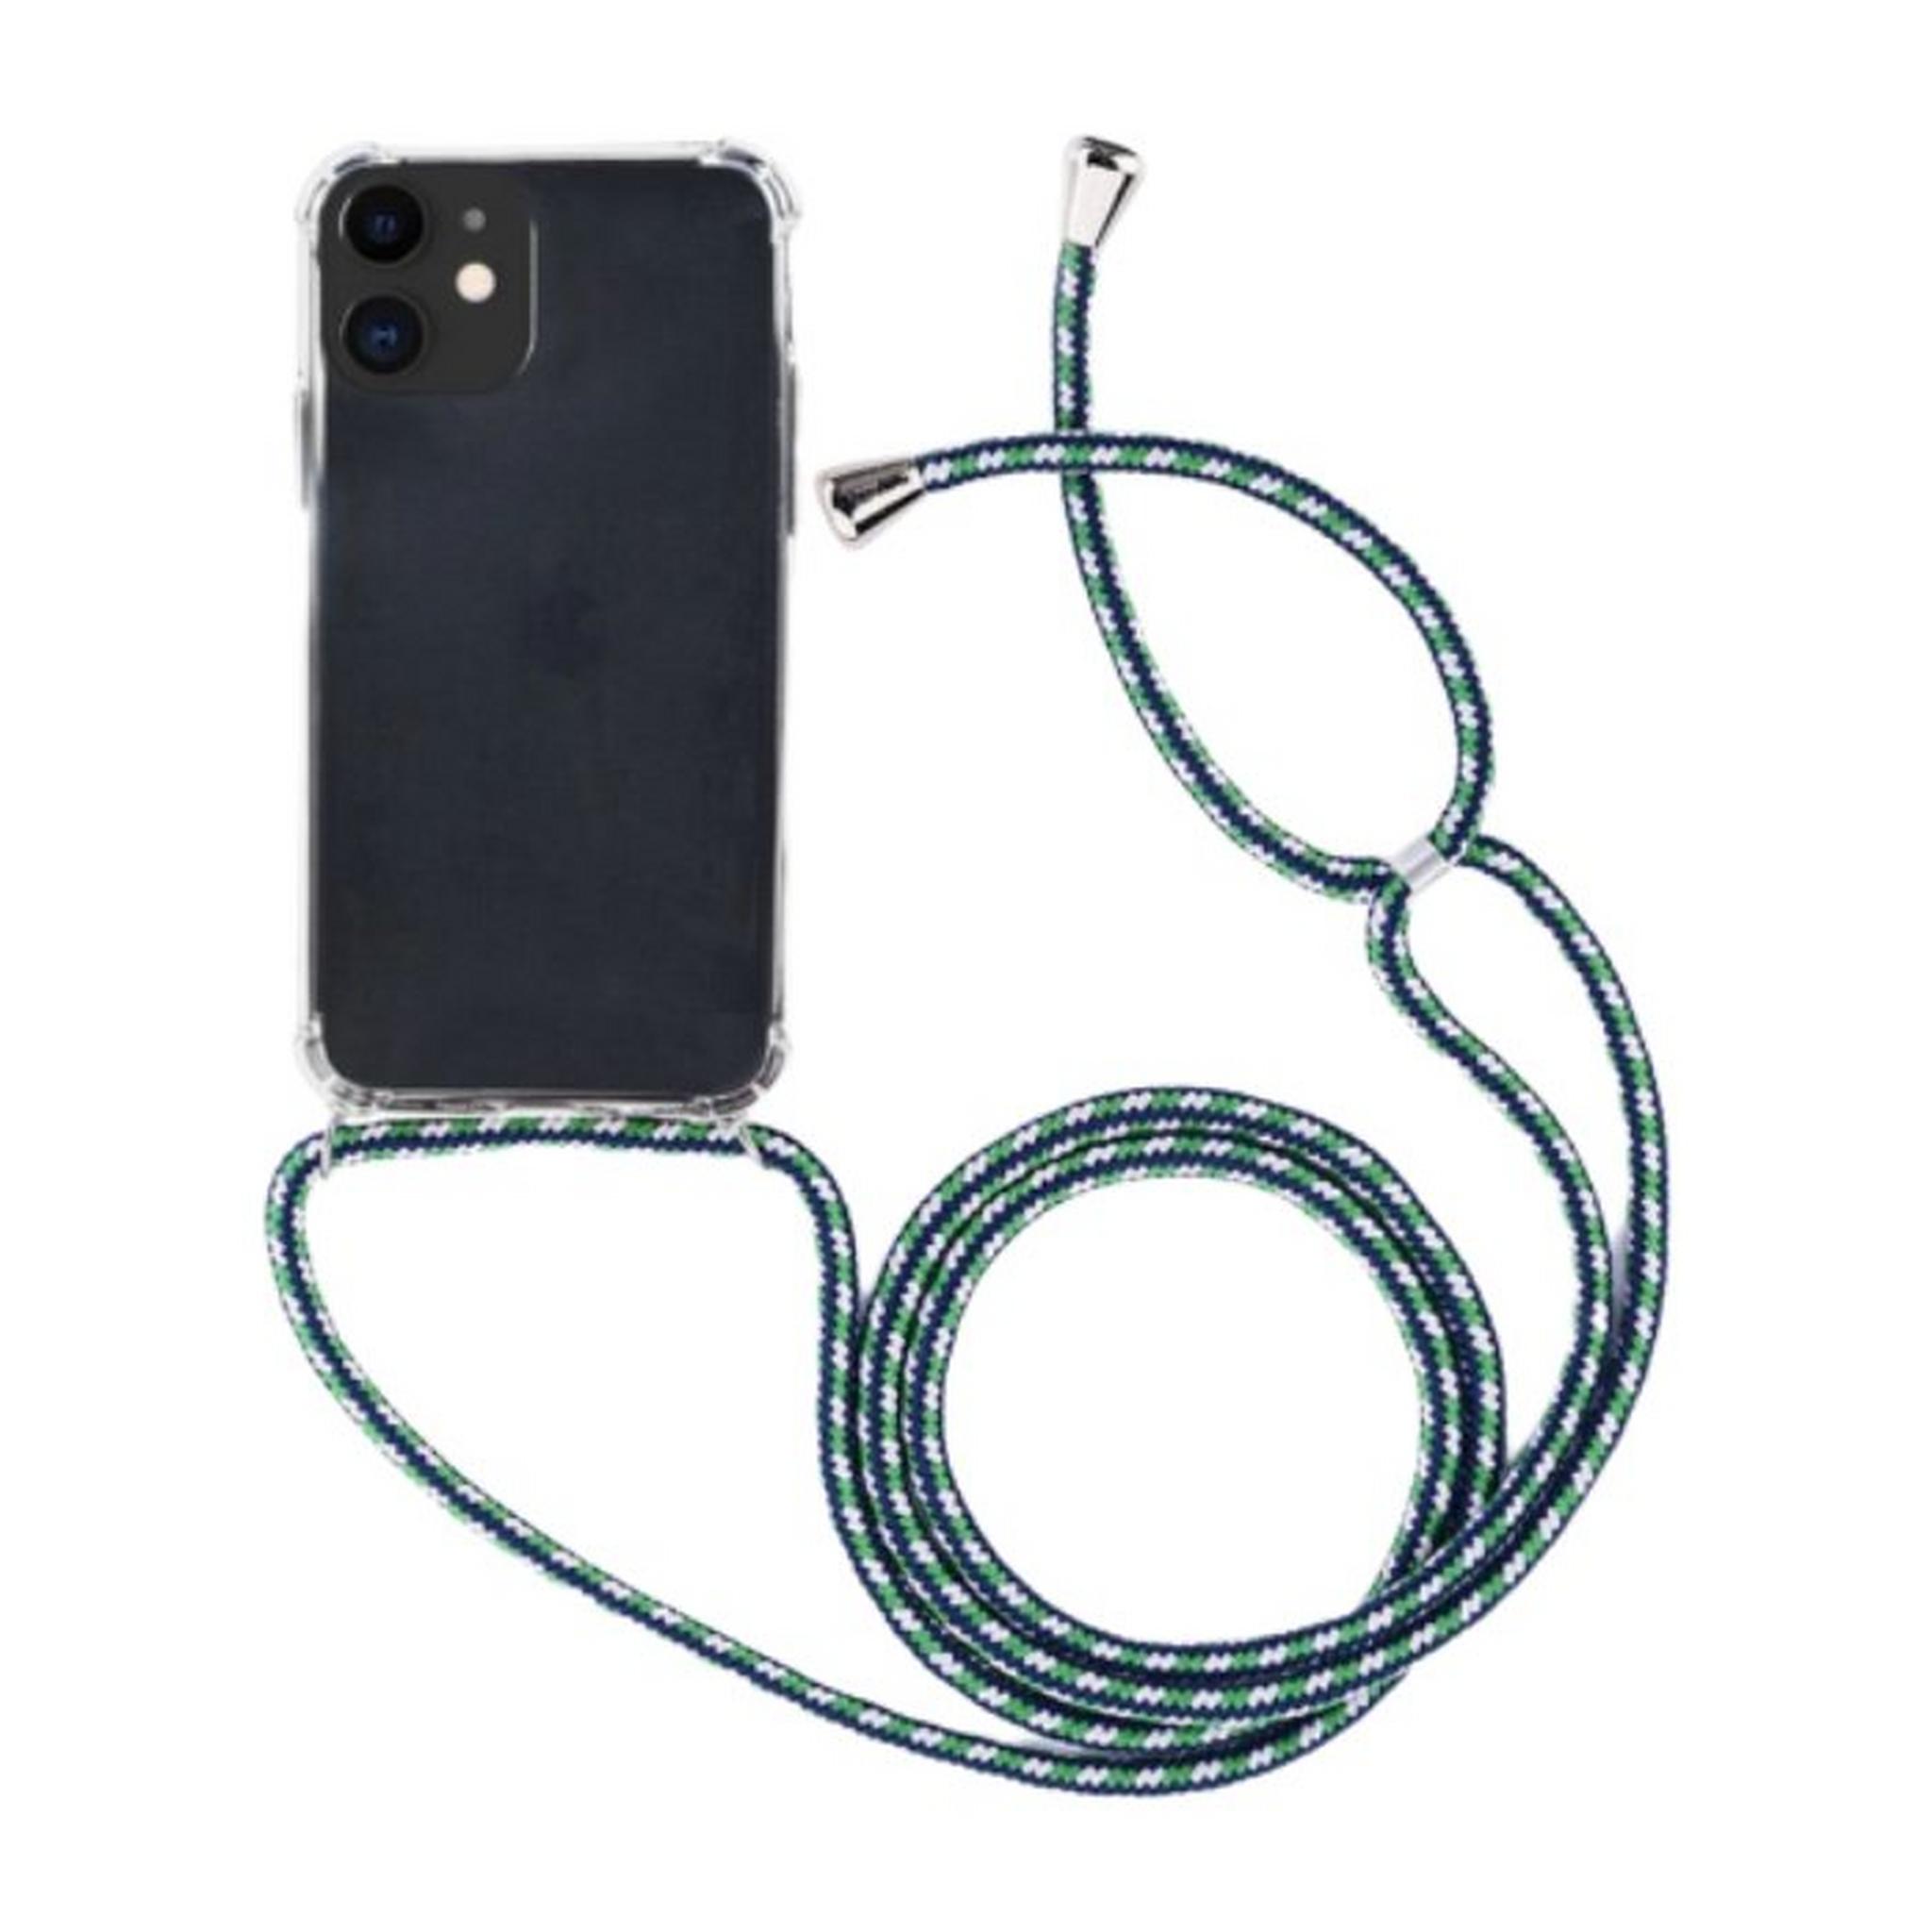 EQ Necklace String iPhone 11 Case - Green Strap